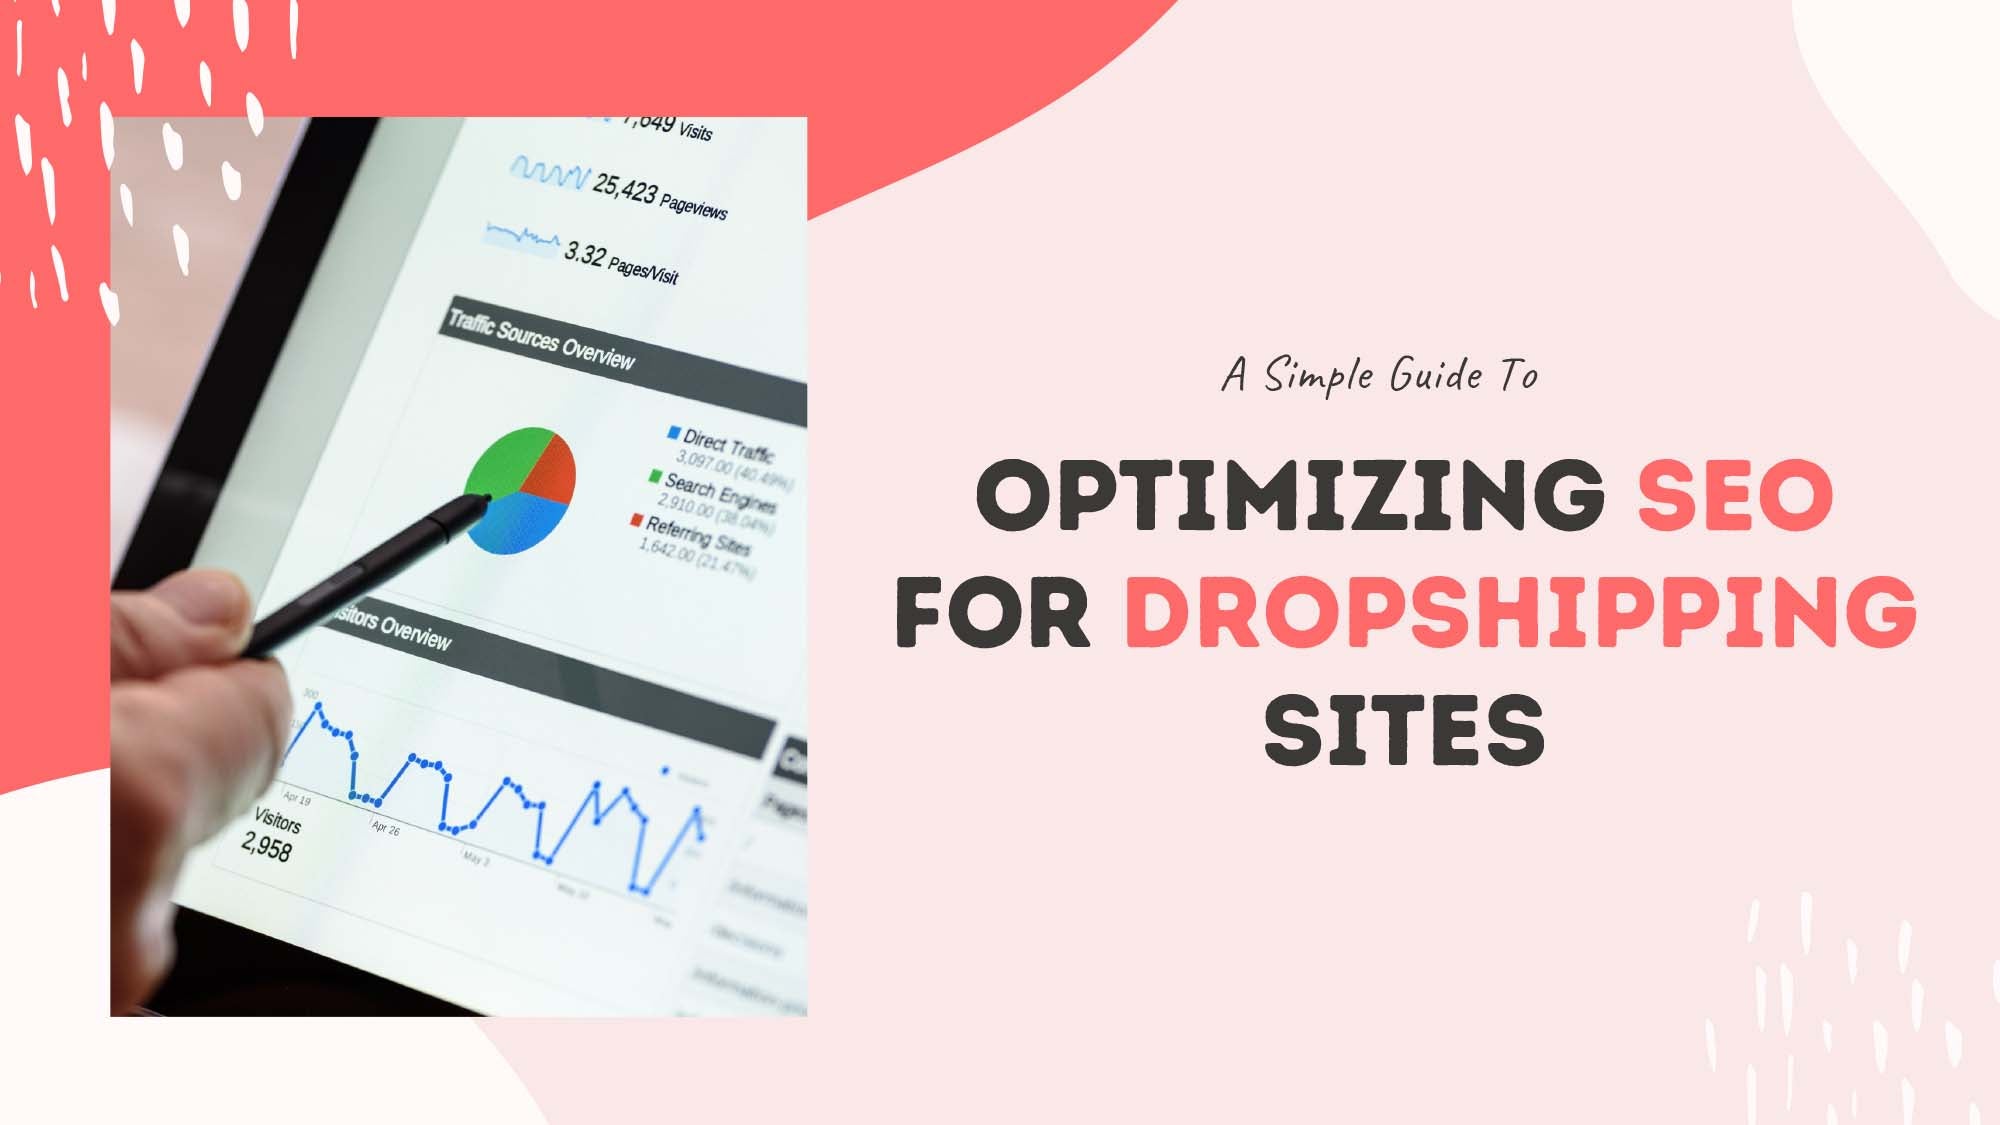 A Simple Guide To Optimizing SEO For Dropshipping Sites